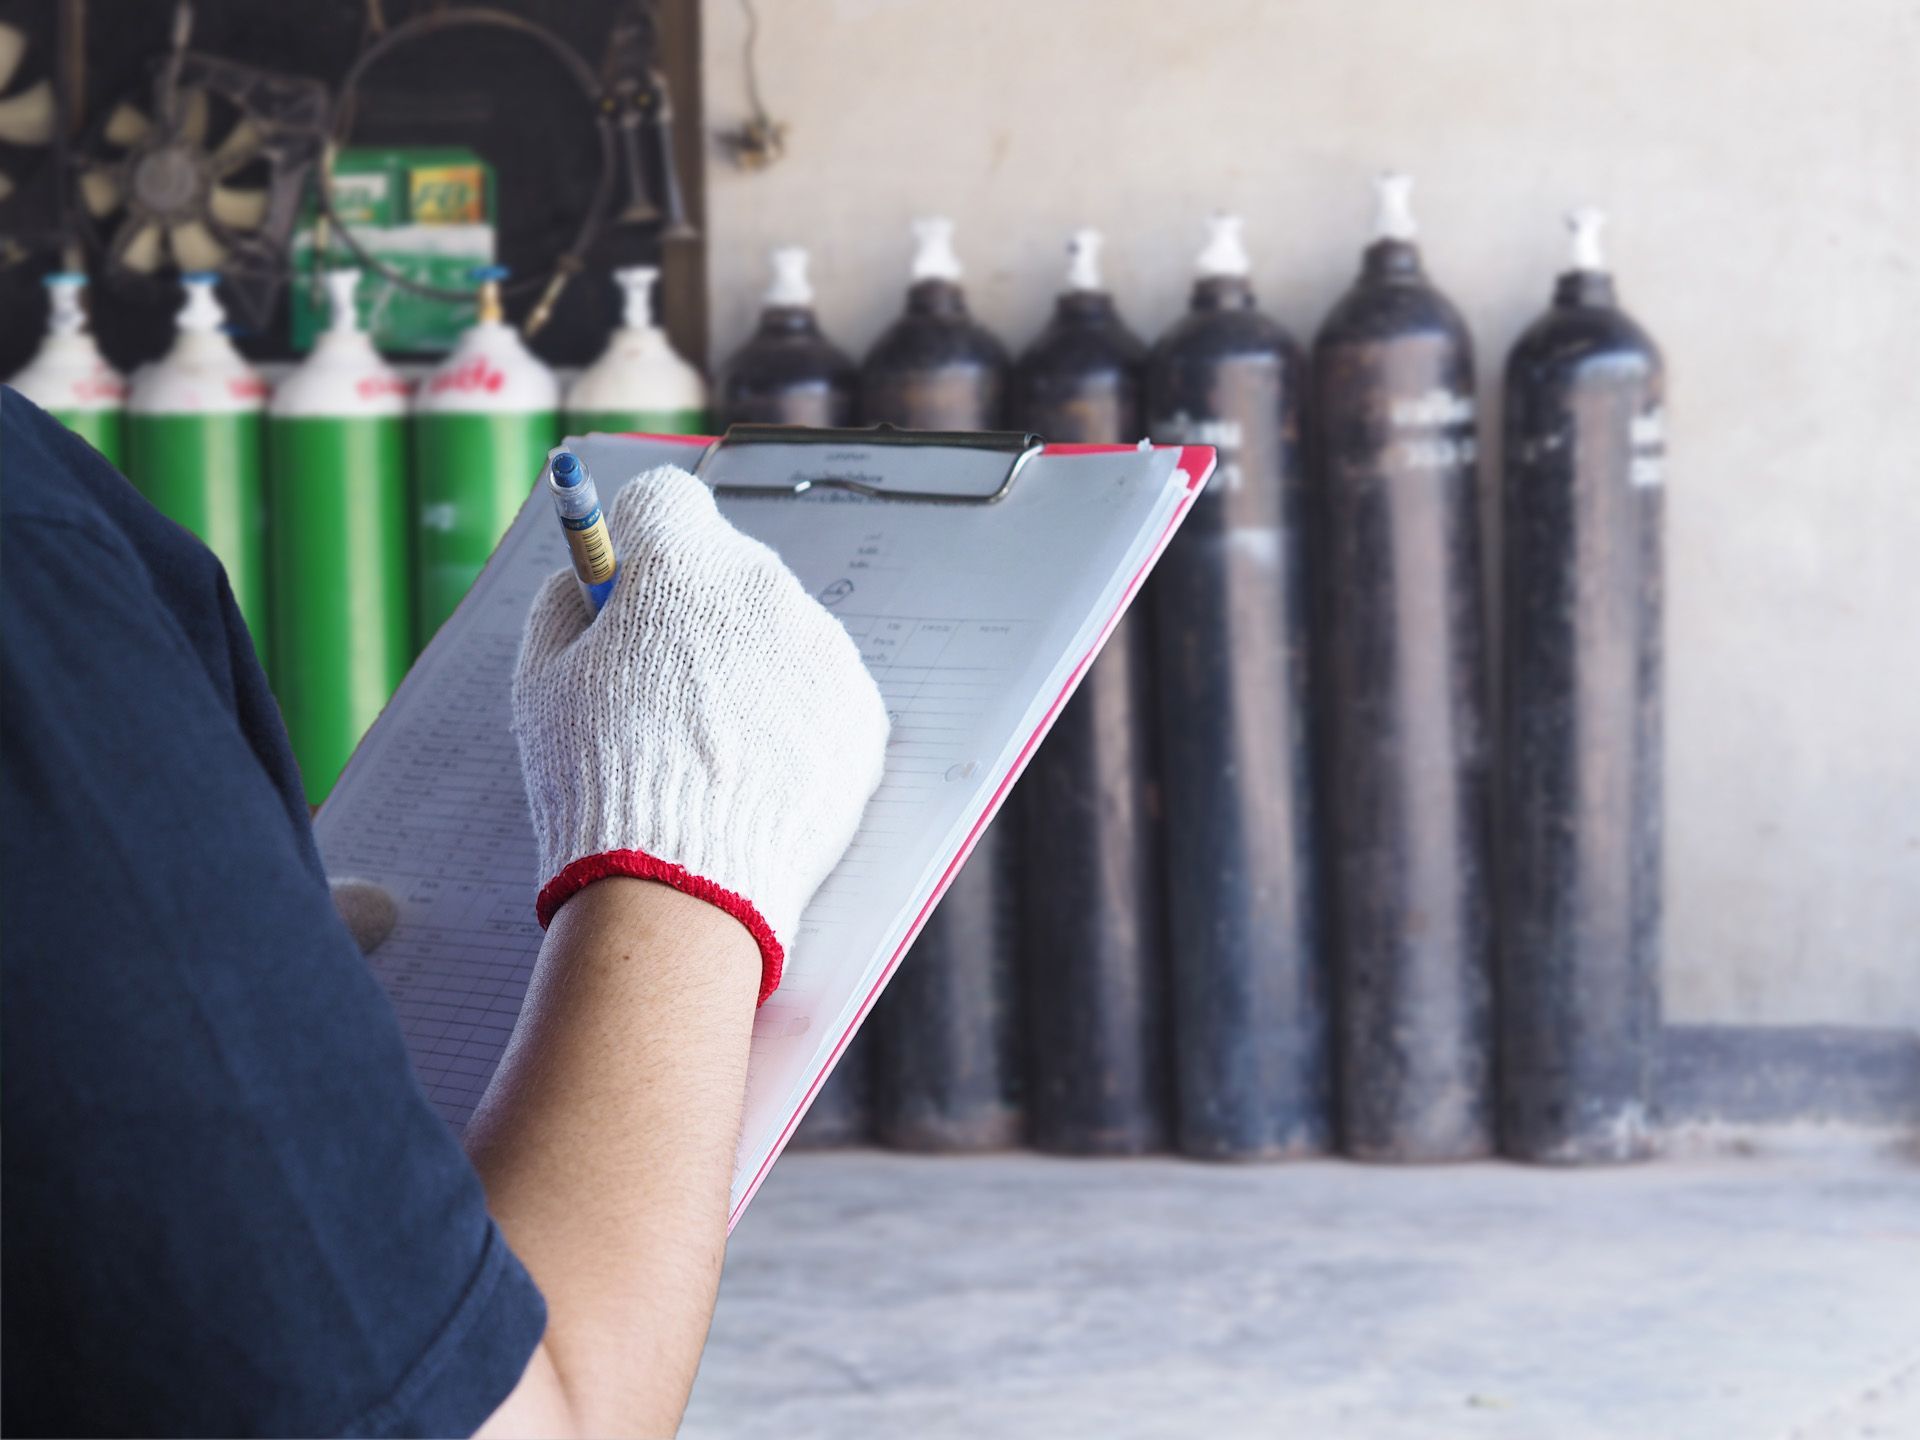 A person is writing on a clipboard in front of a row of gas cylinders